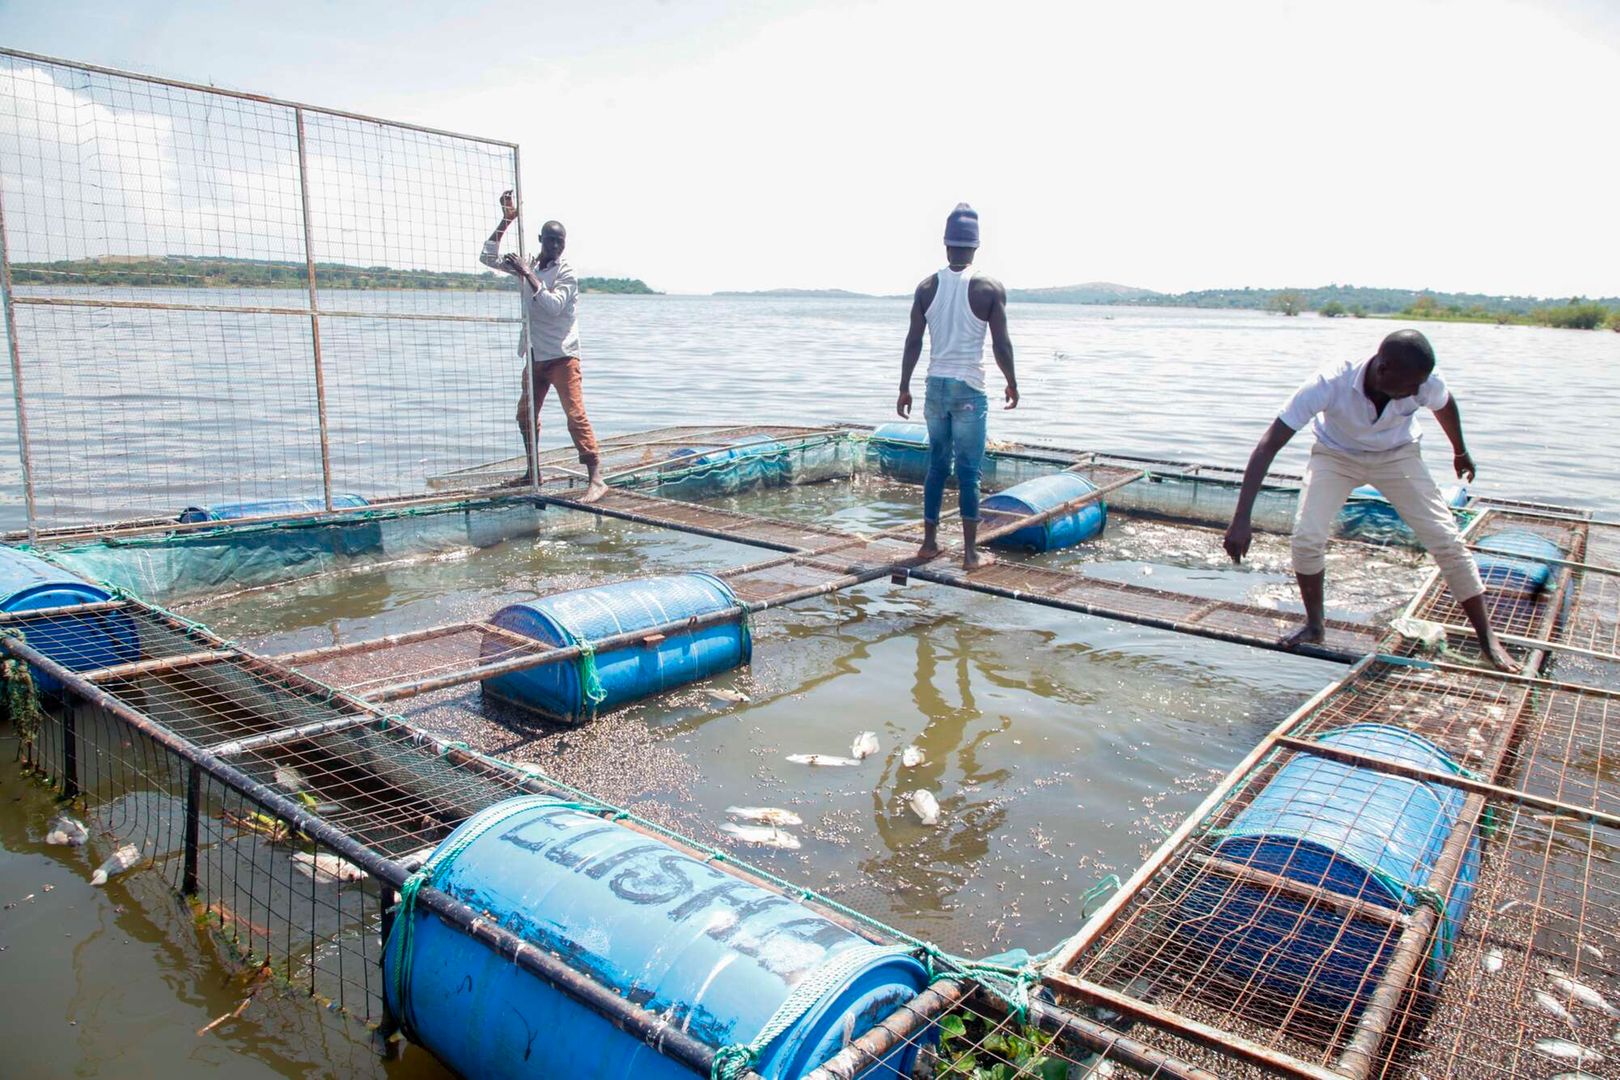 Pollution blamed for mass fish deaths in Lake Victoria